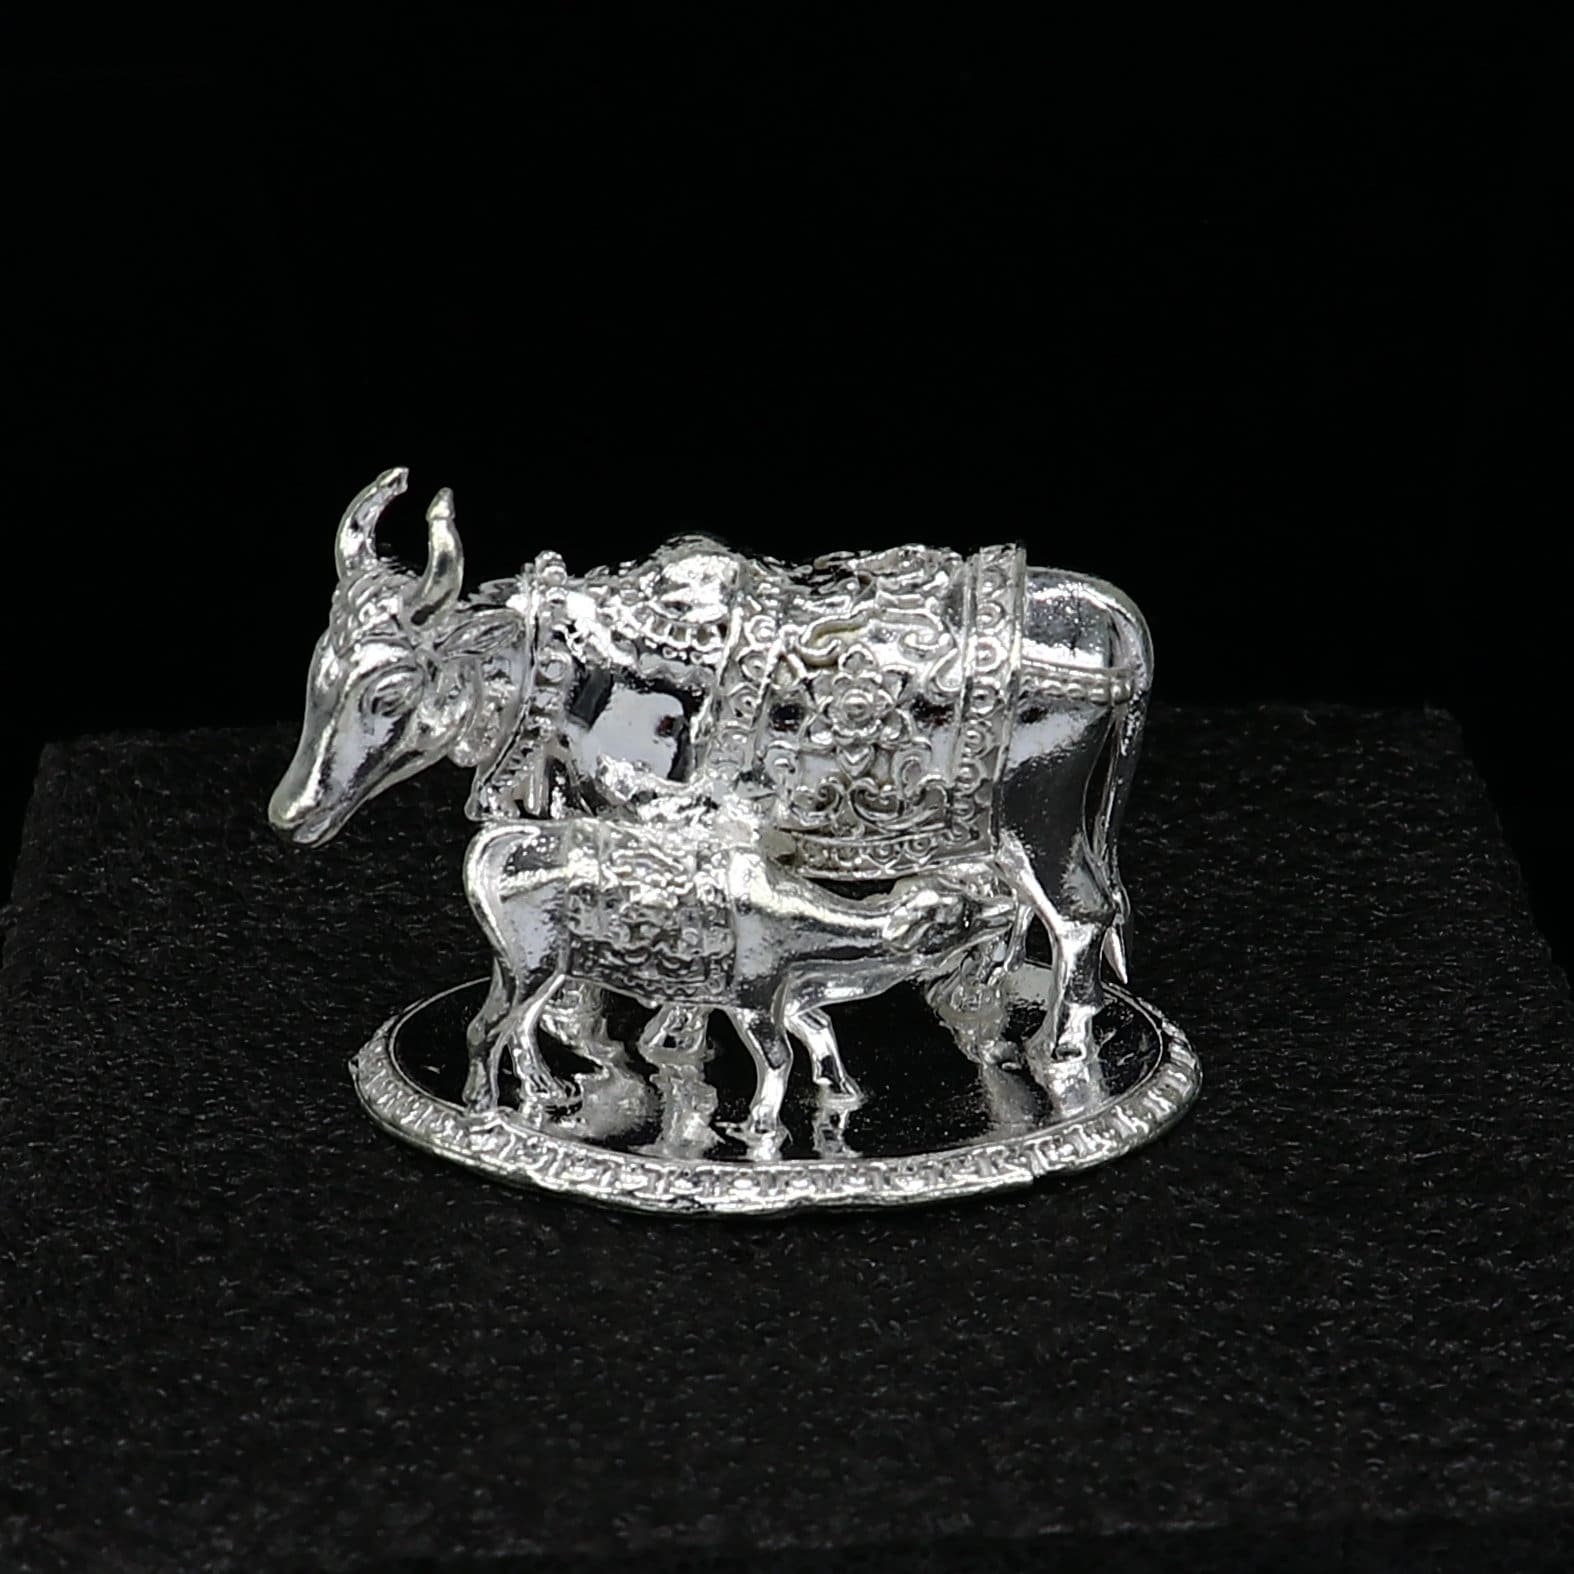 Divine cow with calf 925 sterling silver vintage design Kamdhenu cow, deity's cow, wishing cow, silver worshipping puja article su1163 - TRIBAL ORNAMENTS